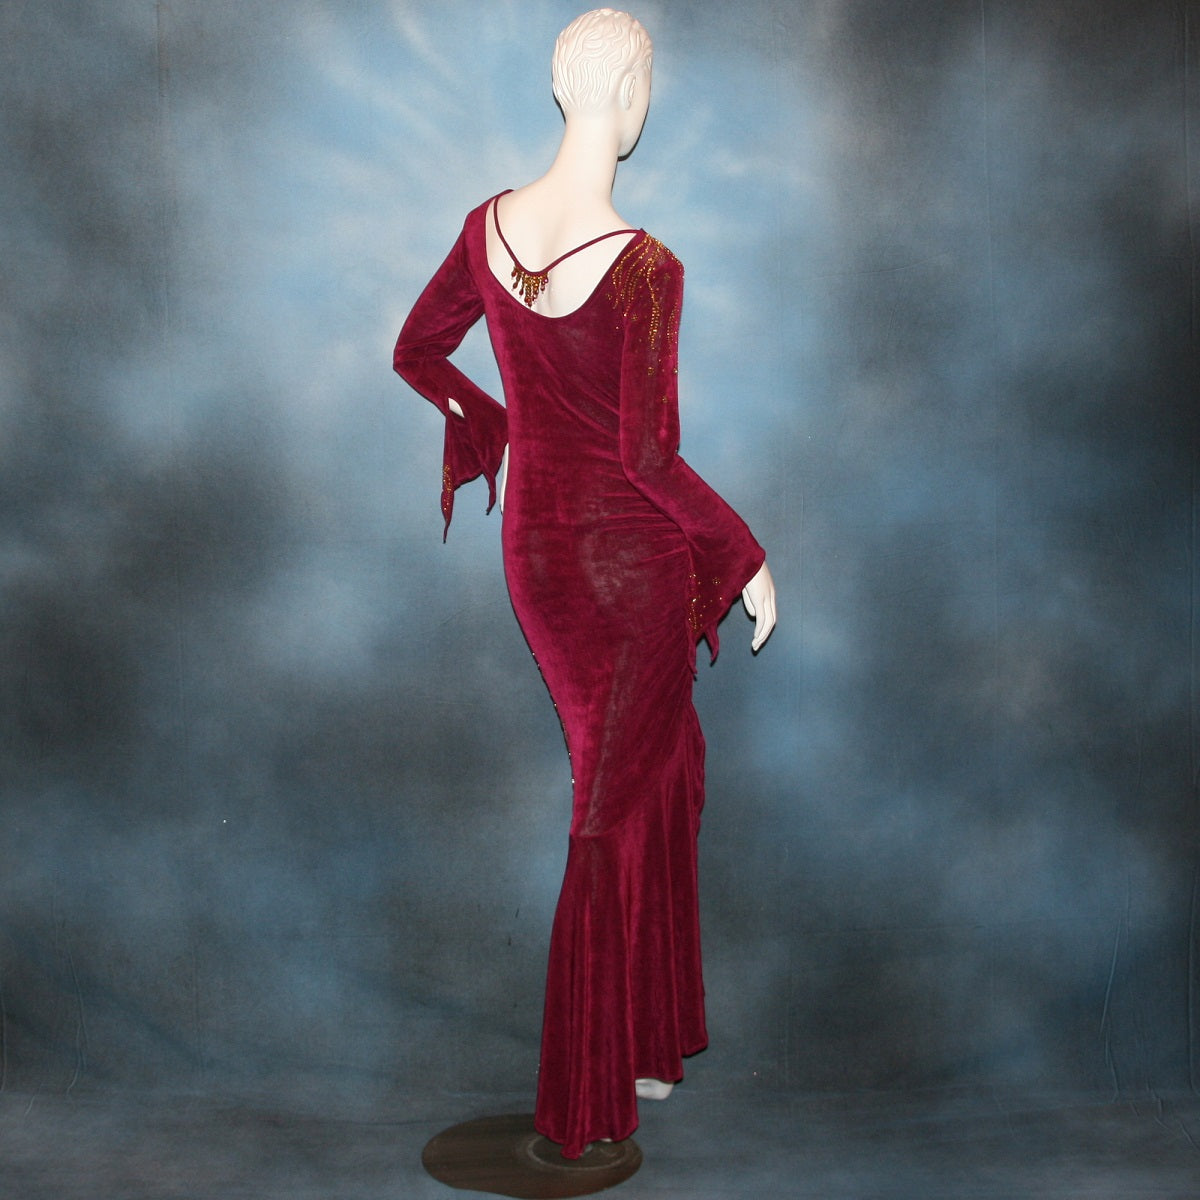 Crystal's Creations back view of Magenta Latin/rhythm/tango dress created out of deep magenta/wine slinky features ruching, long flared sleeves & is embellished with gold aurum Swarovski rhinestone work 